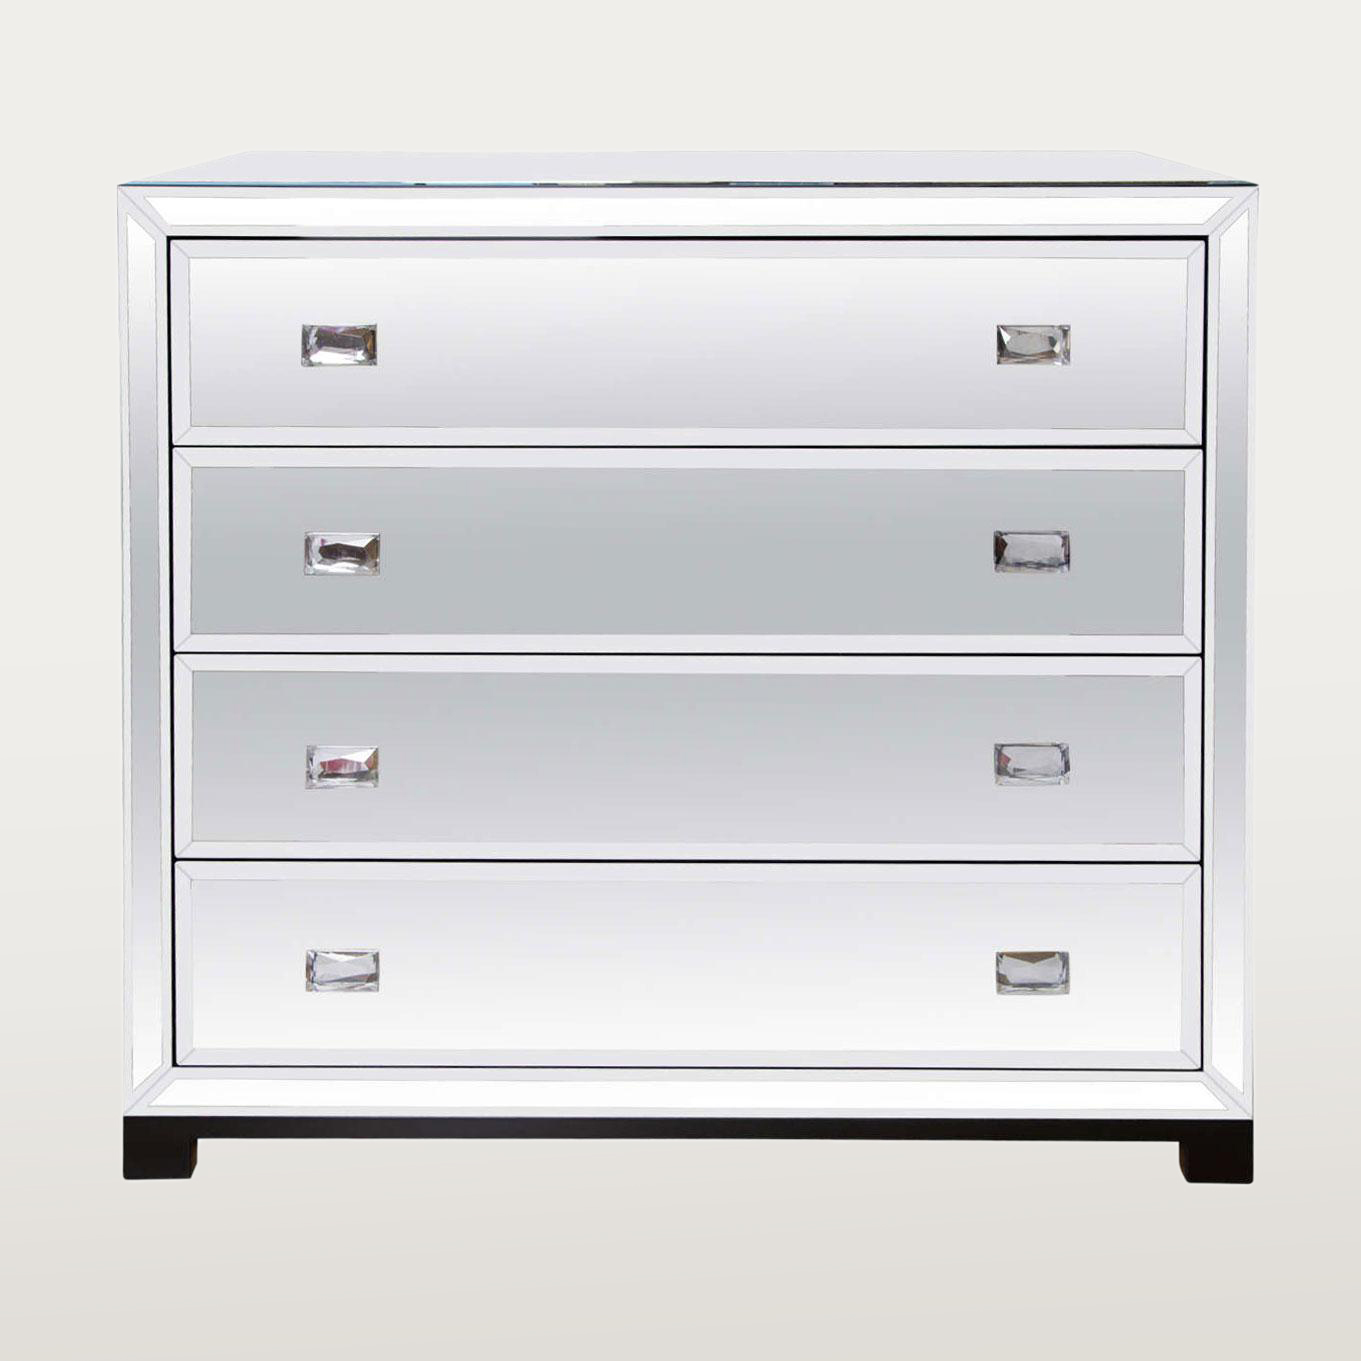 The image for Valerie Wade Fc303 Venice Chest Drawers Faceted Crystal Handles 01